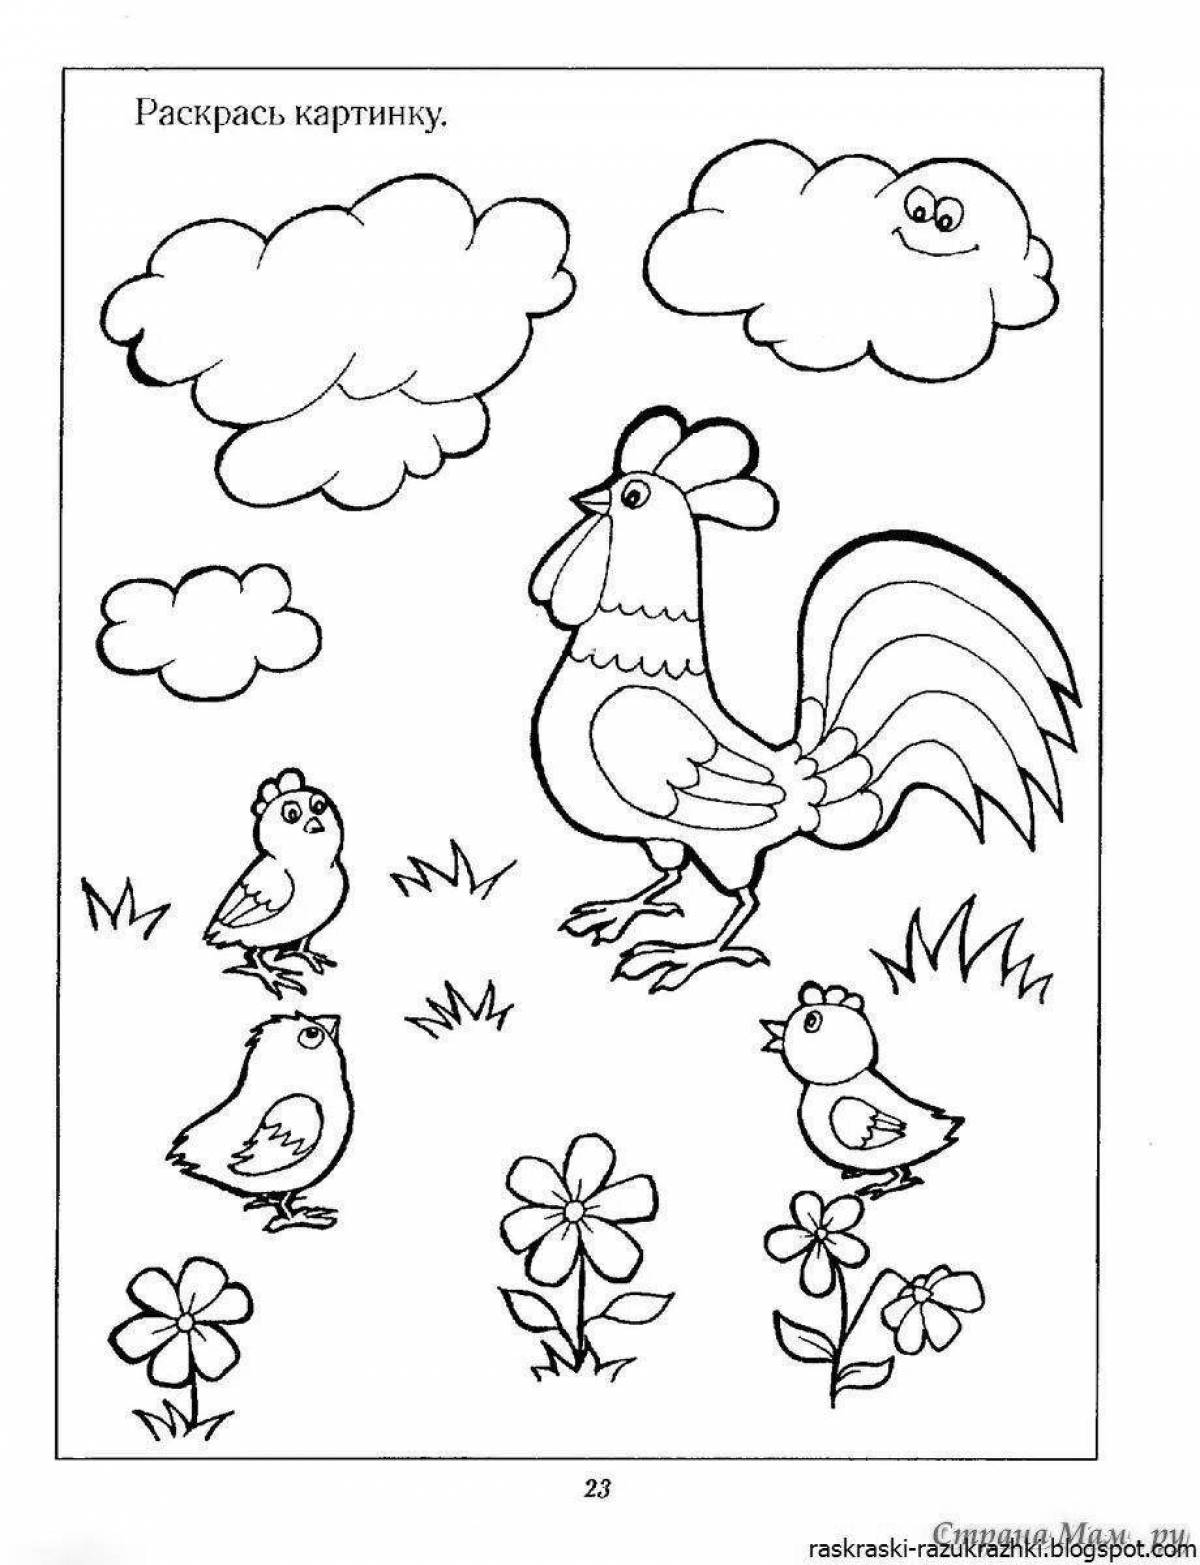 Intriguing coloring book for 3-4 year olds